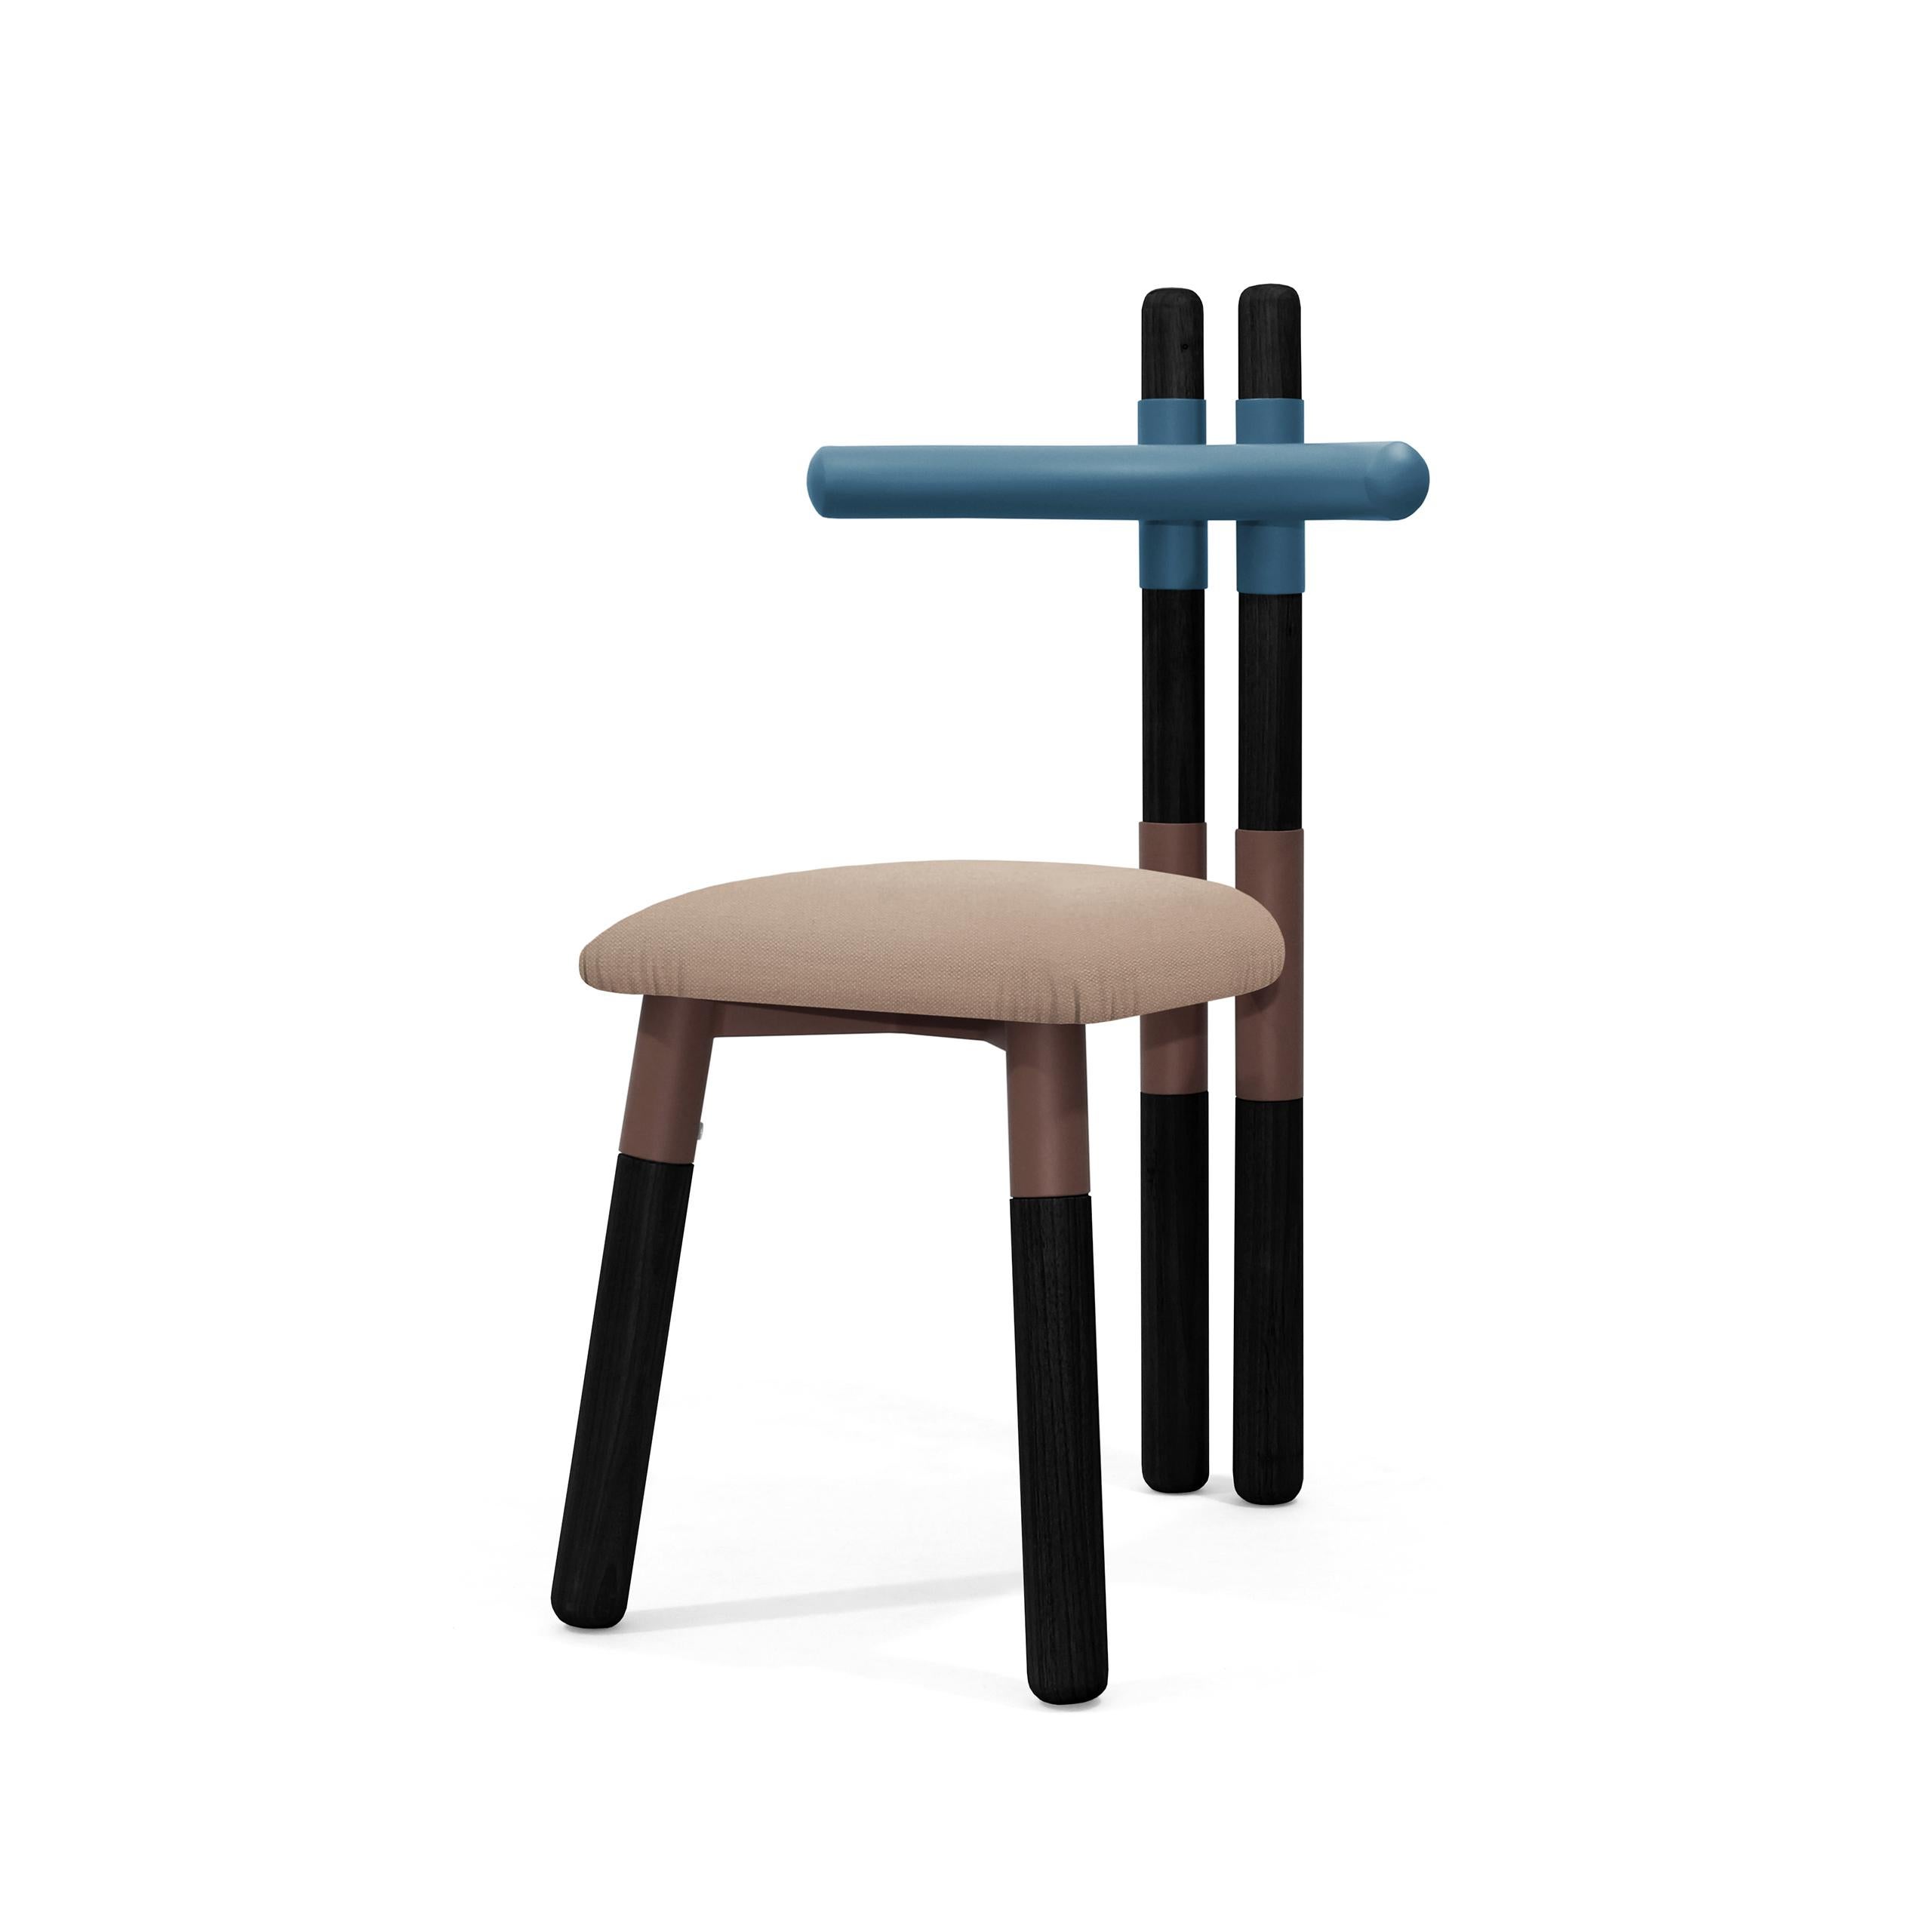 Upholstered PK12 Chair, Bicolor Steel Structure & Ebonized Legs by Paulo Kobylka For Sale 7